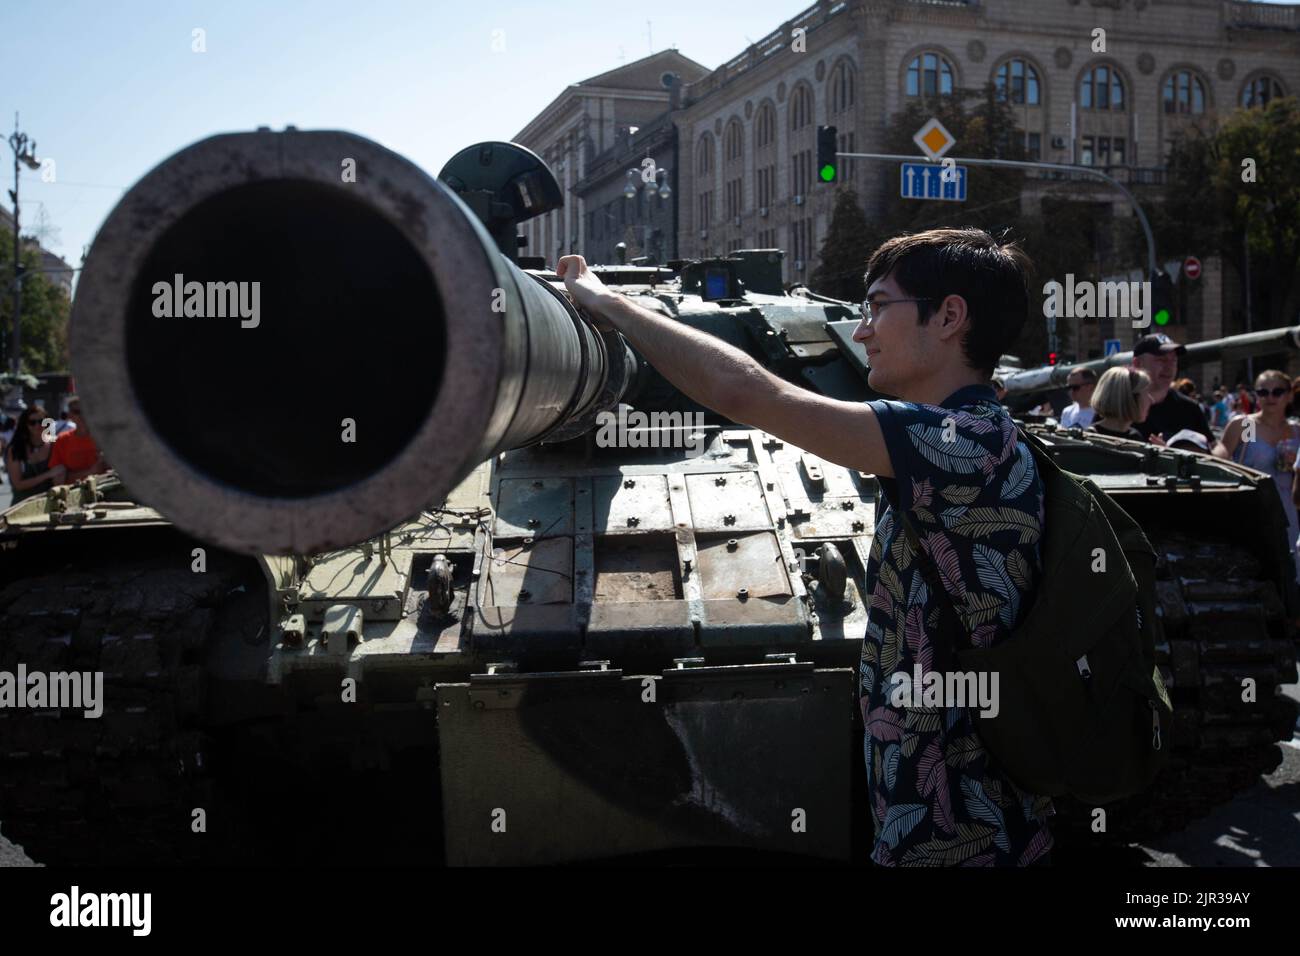 A boy touches a destroyed Russian tank displayed on the main street Khreshchatyk as part of the upcoming celebration of the Independence Day of Ukraine amid Russia's invasion of Ukraine in central Kyiv. Stock Photo